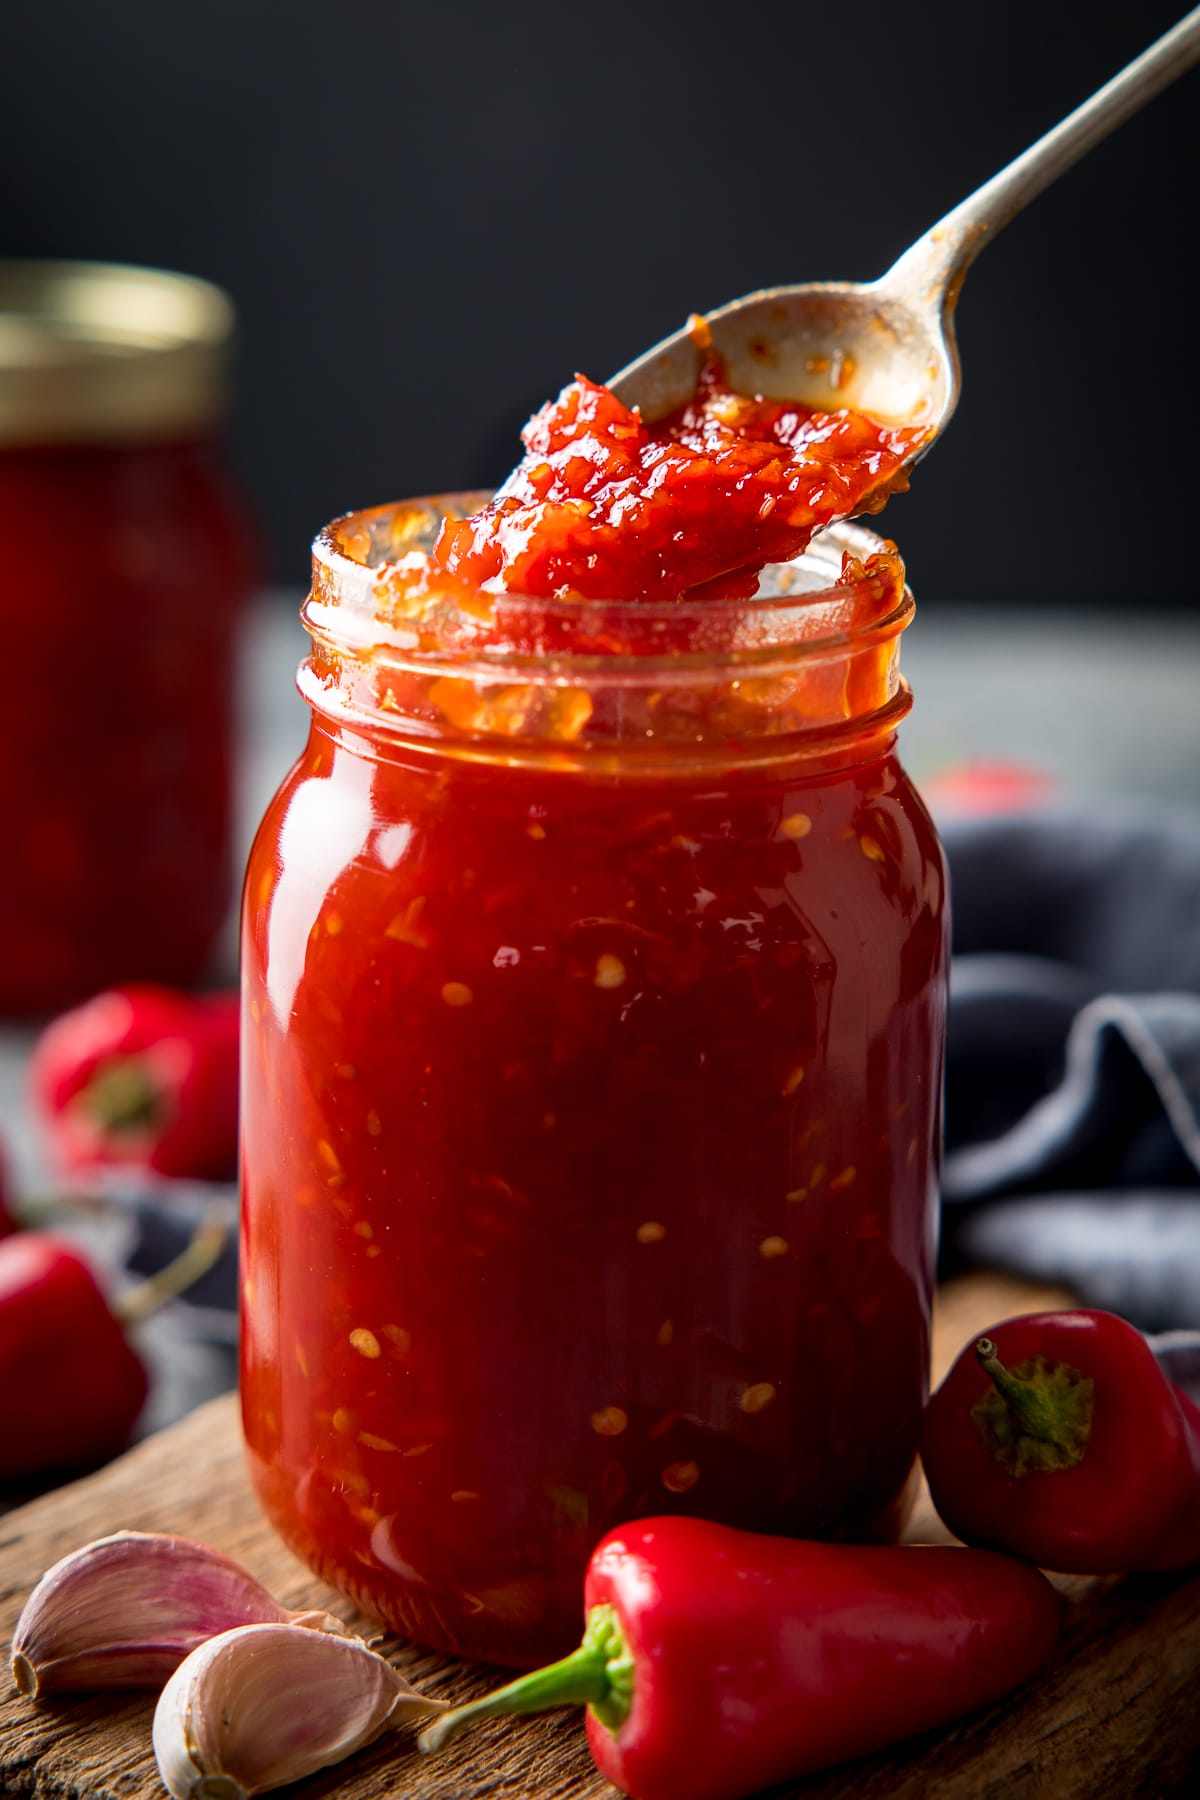 Spoonful being taken from a jar of sweet chilli sauce. Ingredients scattered around the jar.